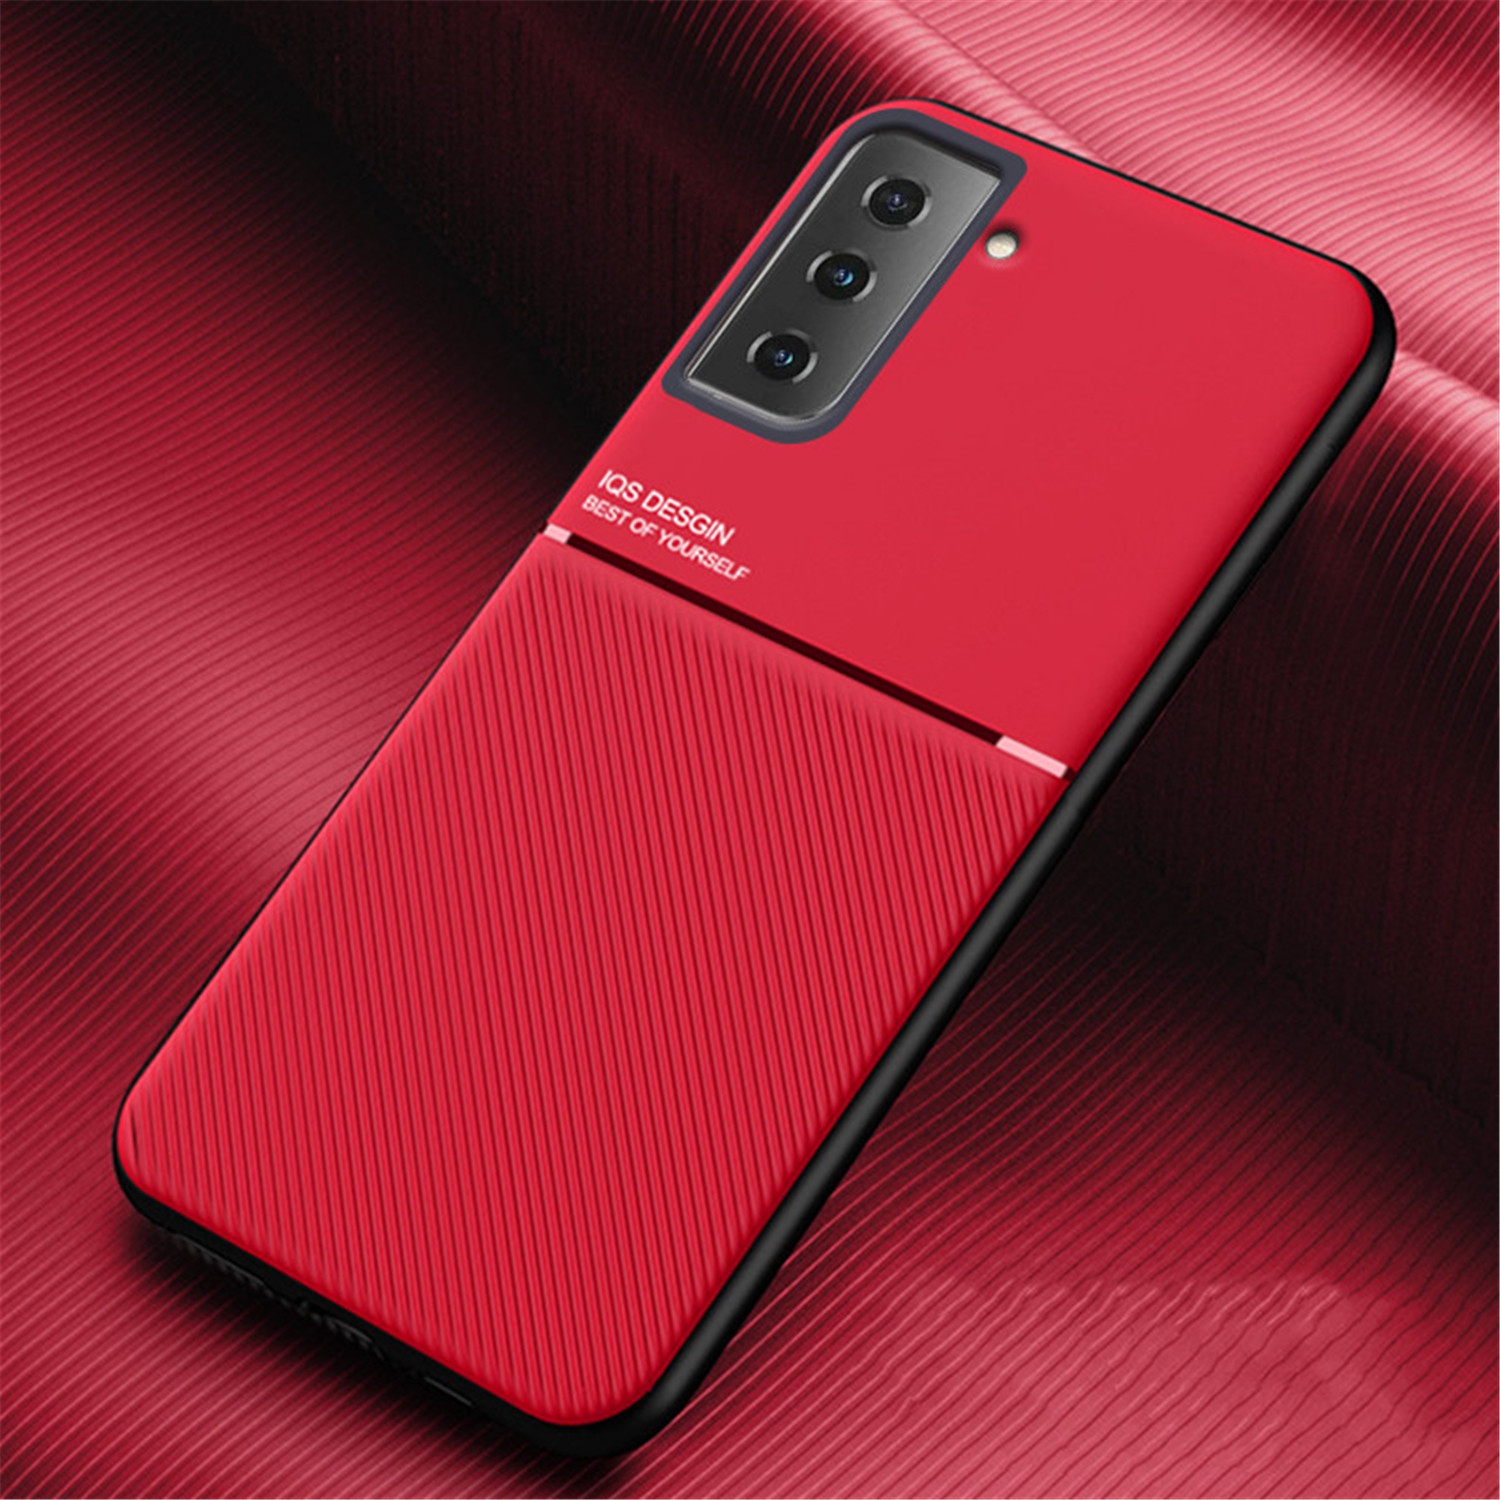 Kelvin Leather Magnetic Texture Slim Matte Back Phone Cove Anti Fall Frosted Stripe Cases For Samsunf Galaxy S22 -Red (FREE SHIPPING)